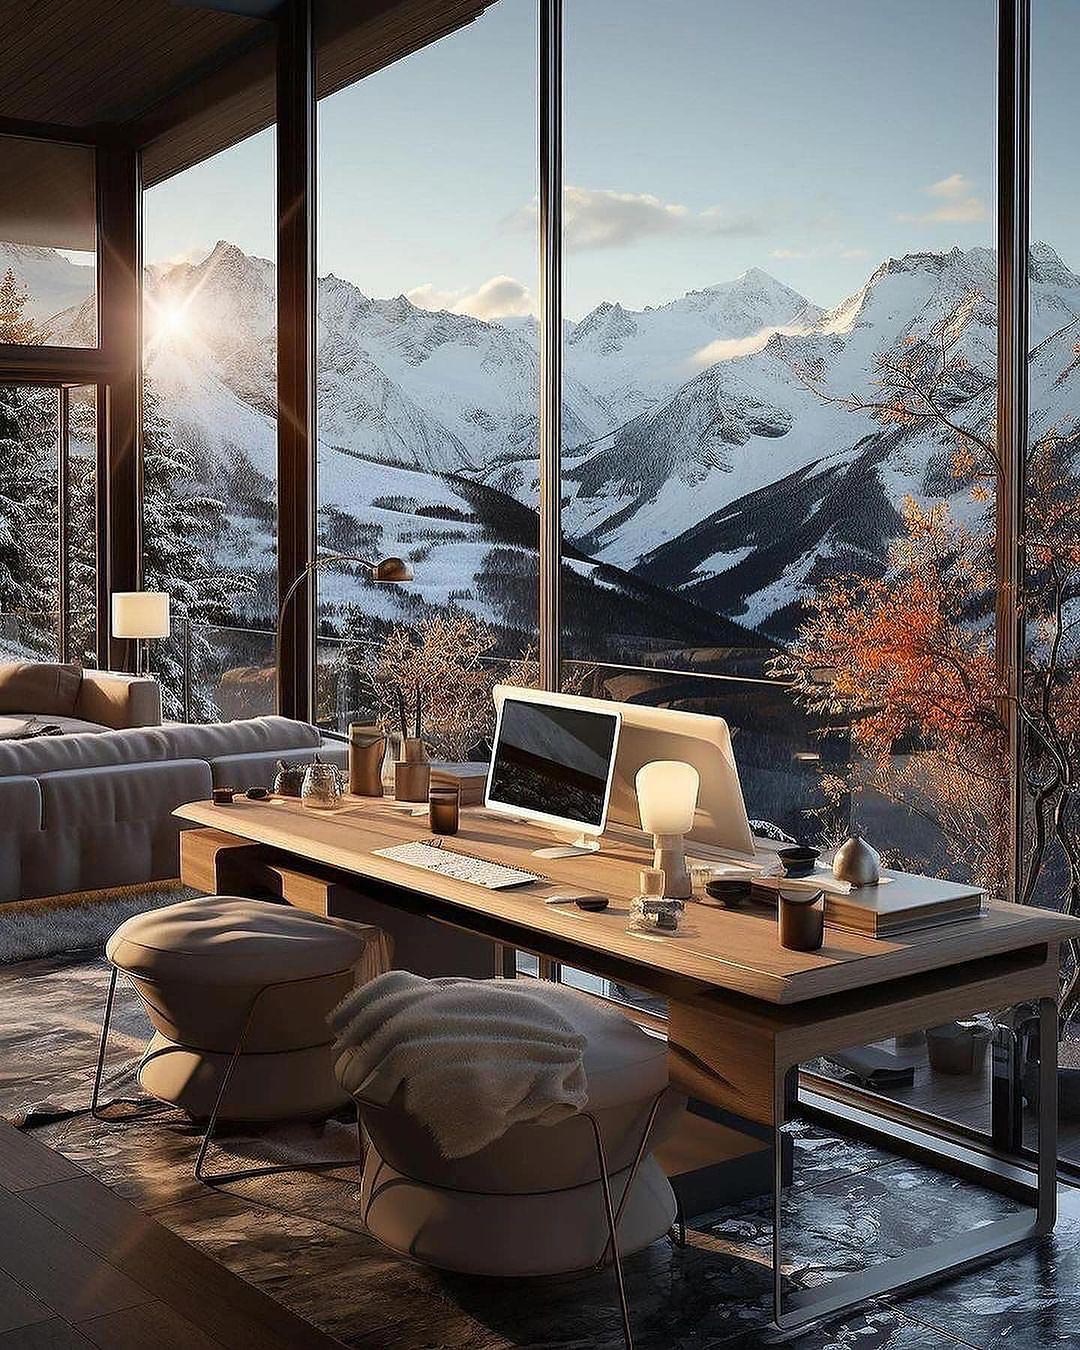 Double desk home office overlooking snowy mountain view